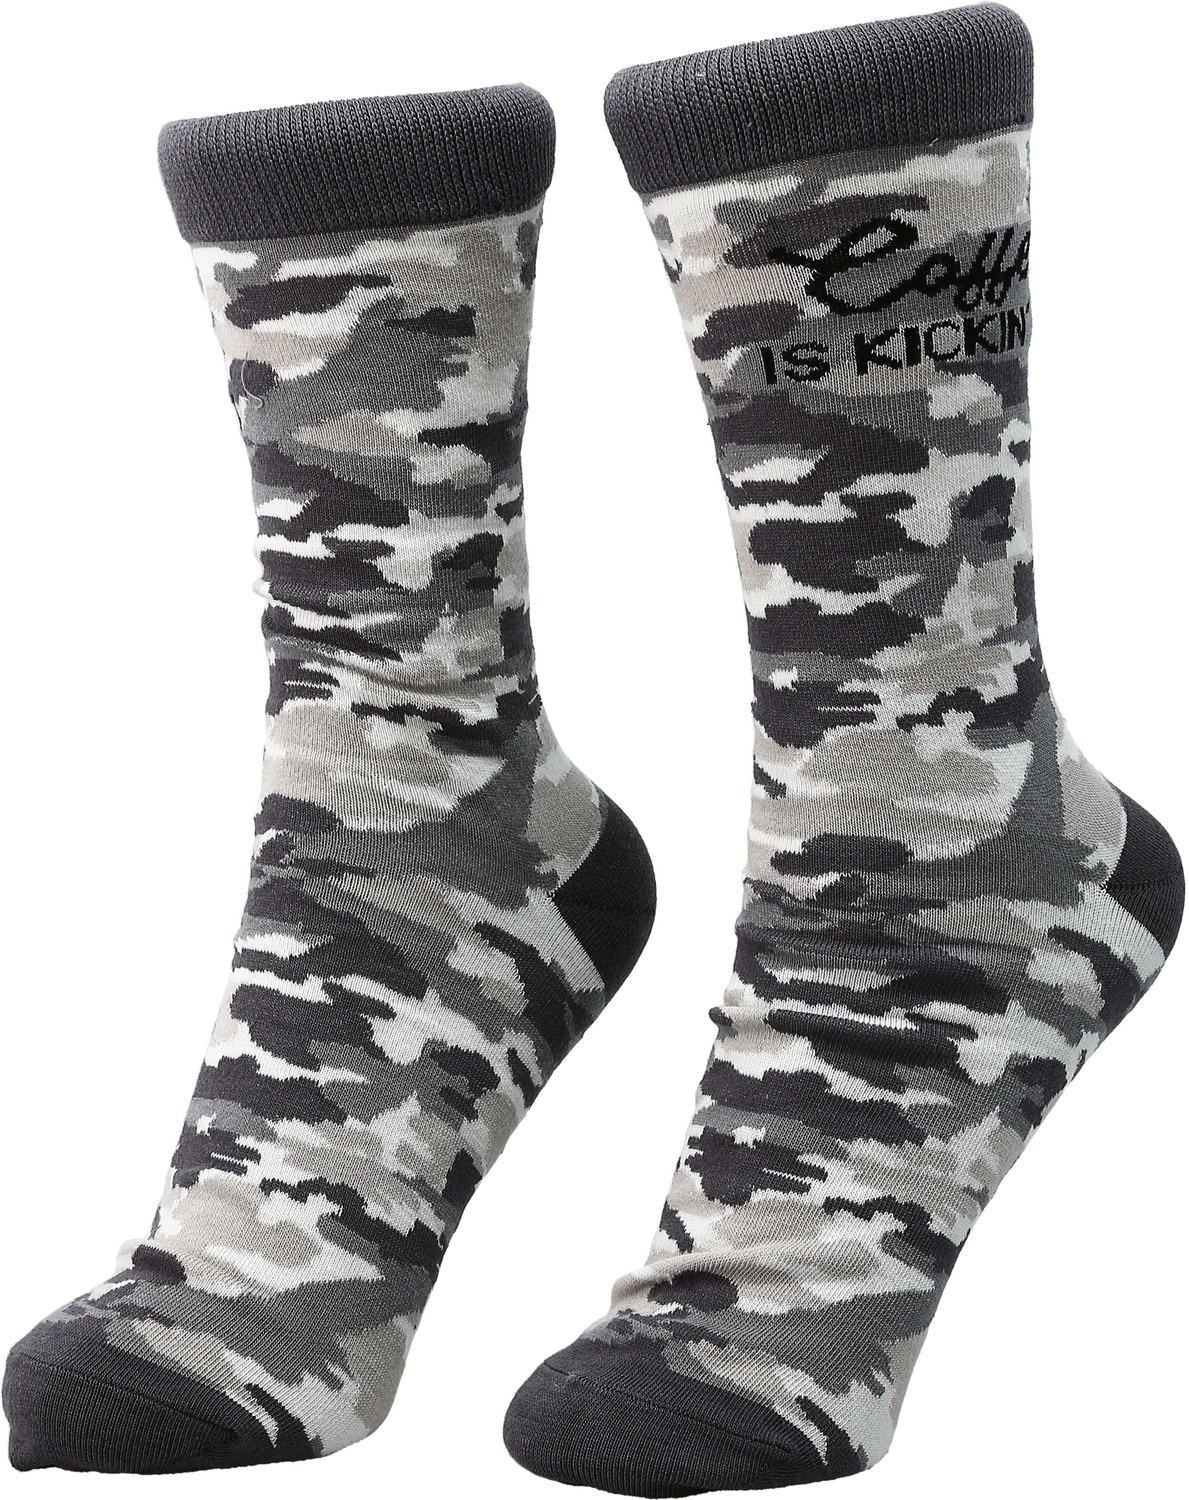 Coffee by Camo Community - Coffee - S-M Cotton Blend Sock